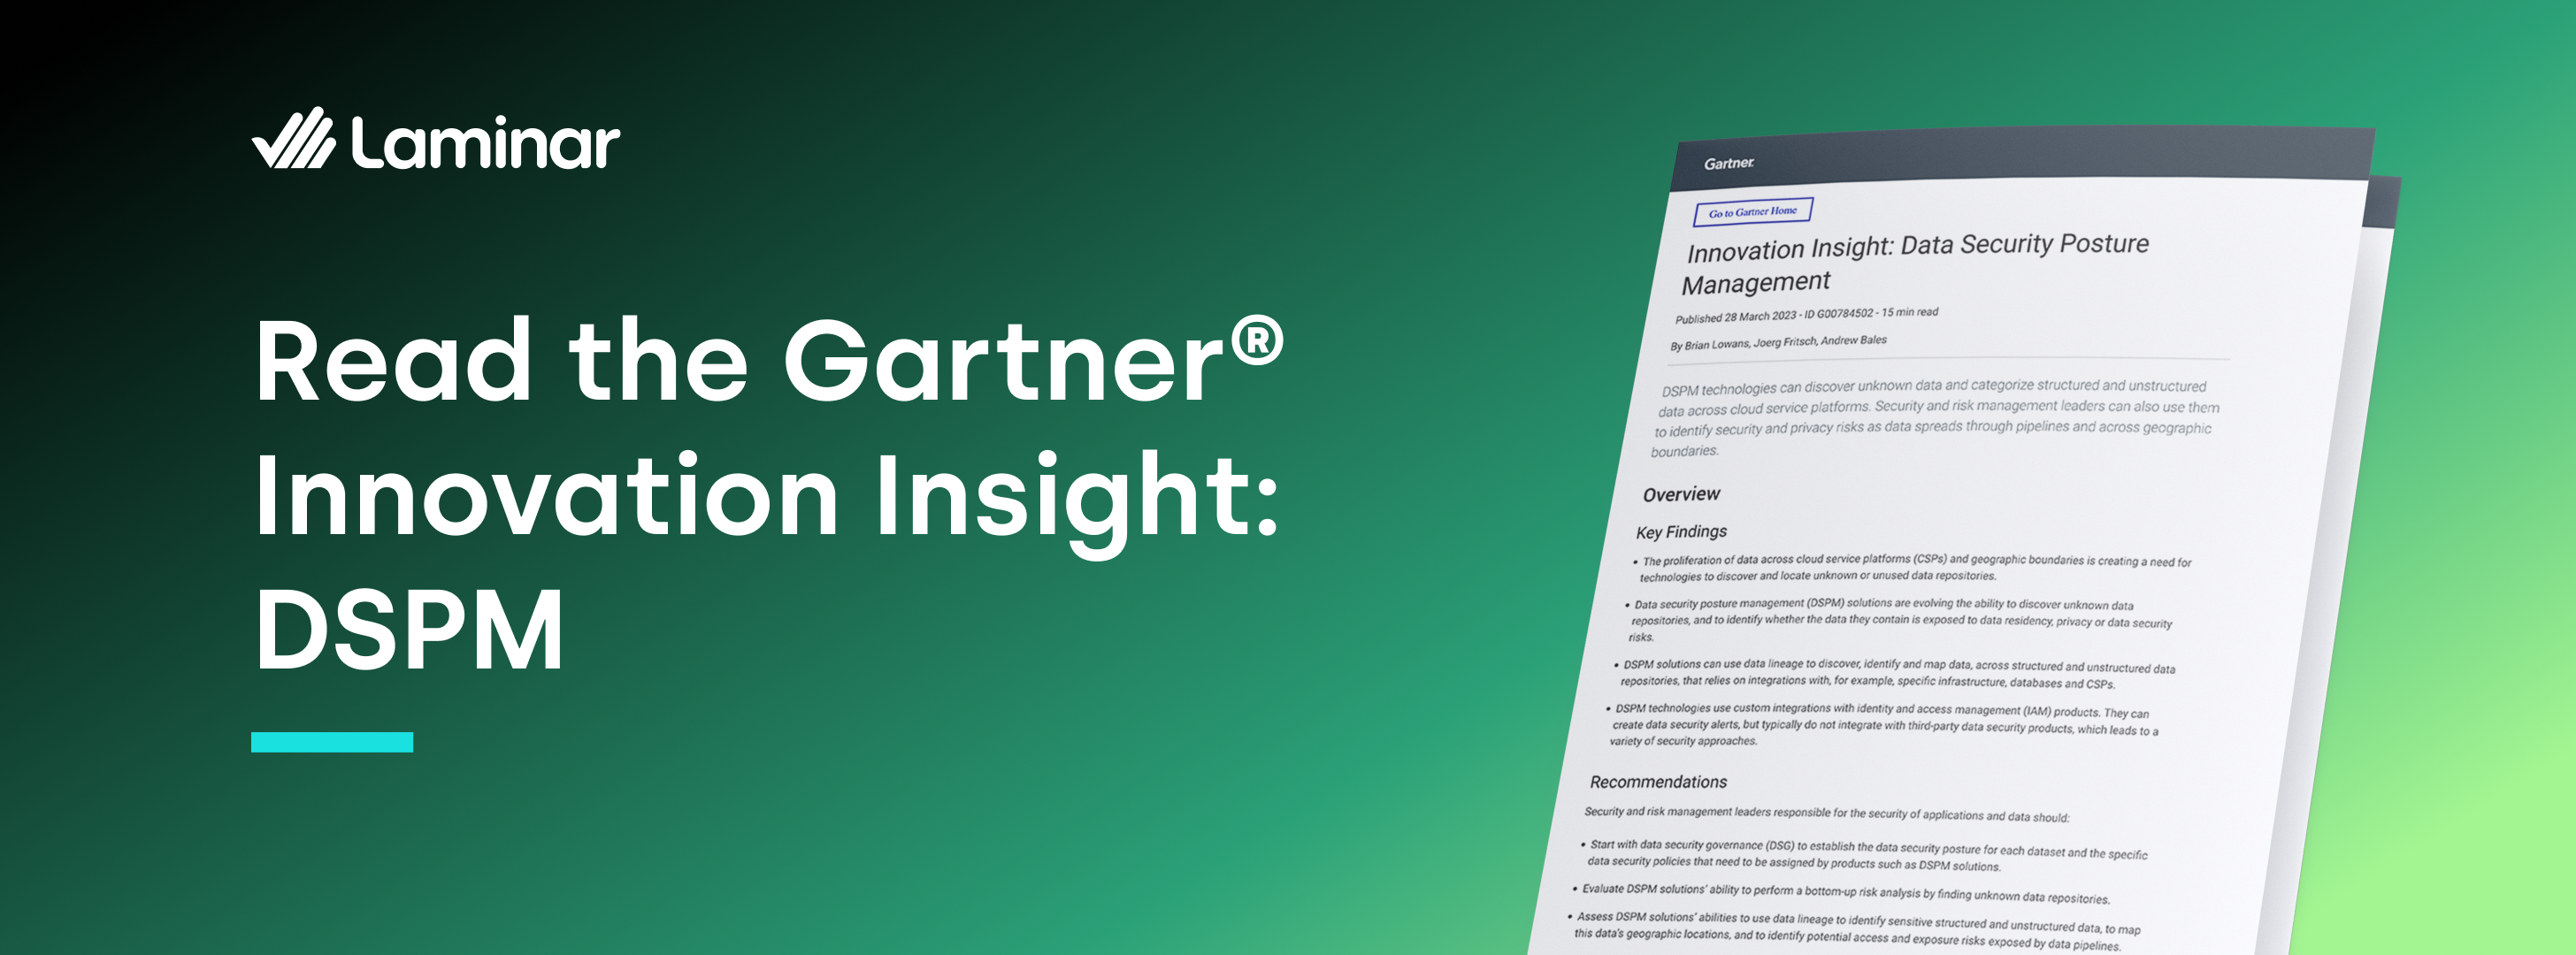 Get your complimentary copy of Gartner® Innovation Insight: Data Security Posture Management (DSPM)